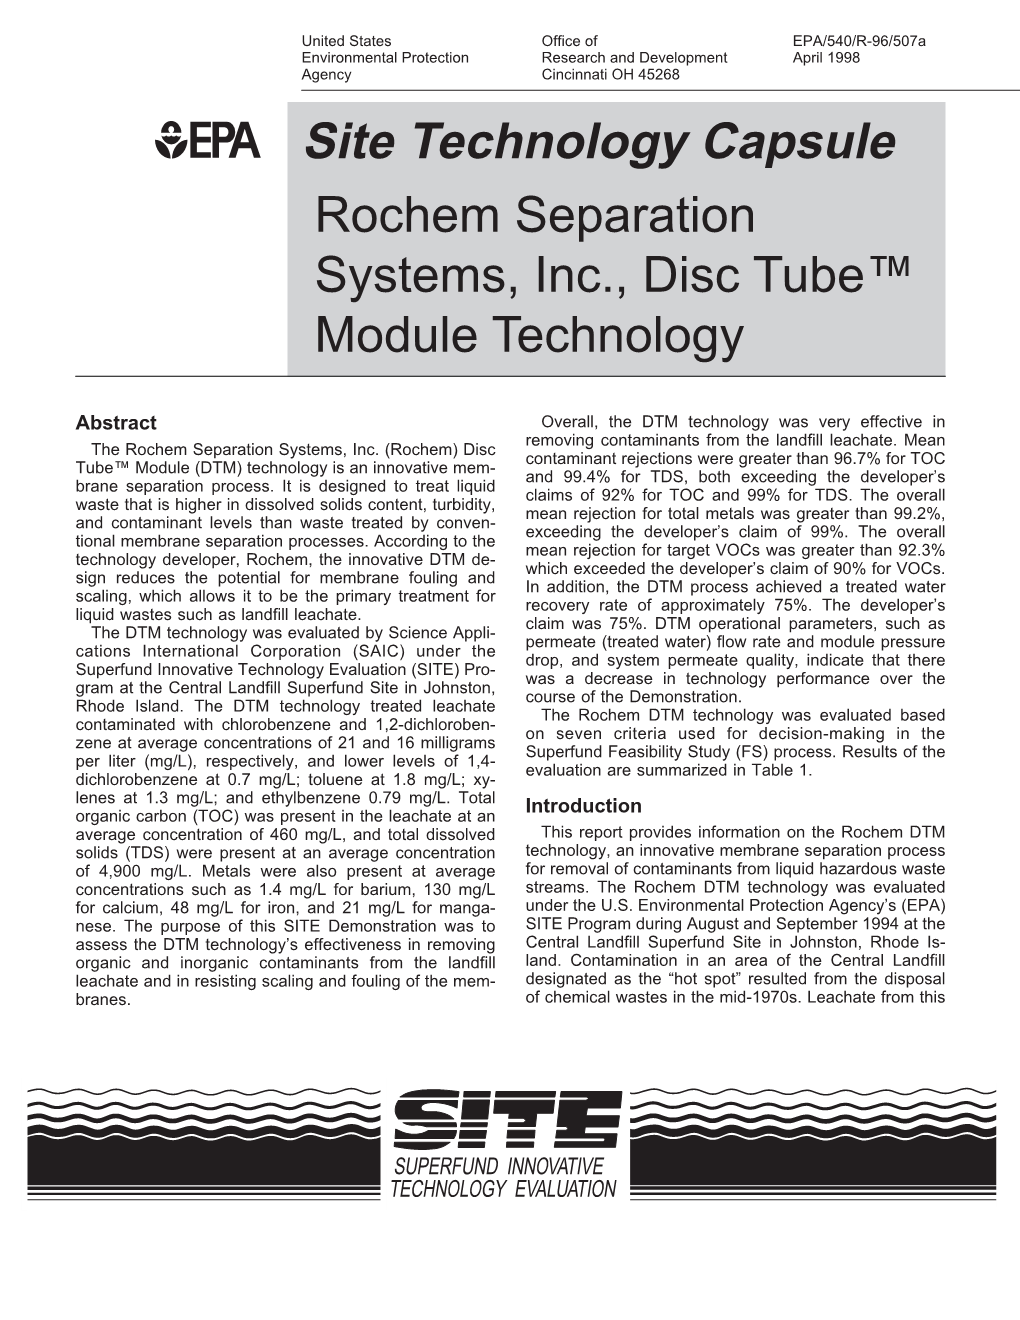 Site Technology Capsule Rochem Separation Systems, Inc., Disc Tube™ Module Technology